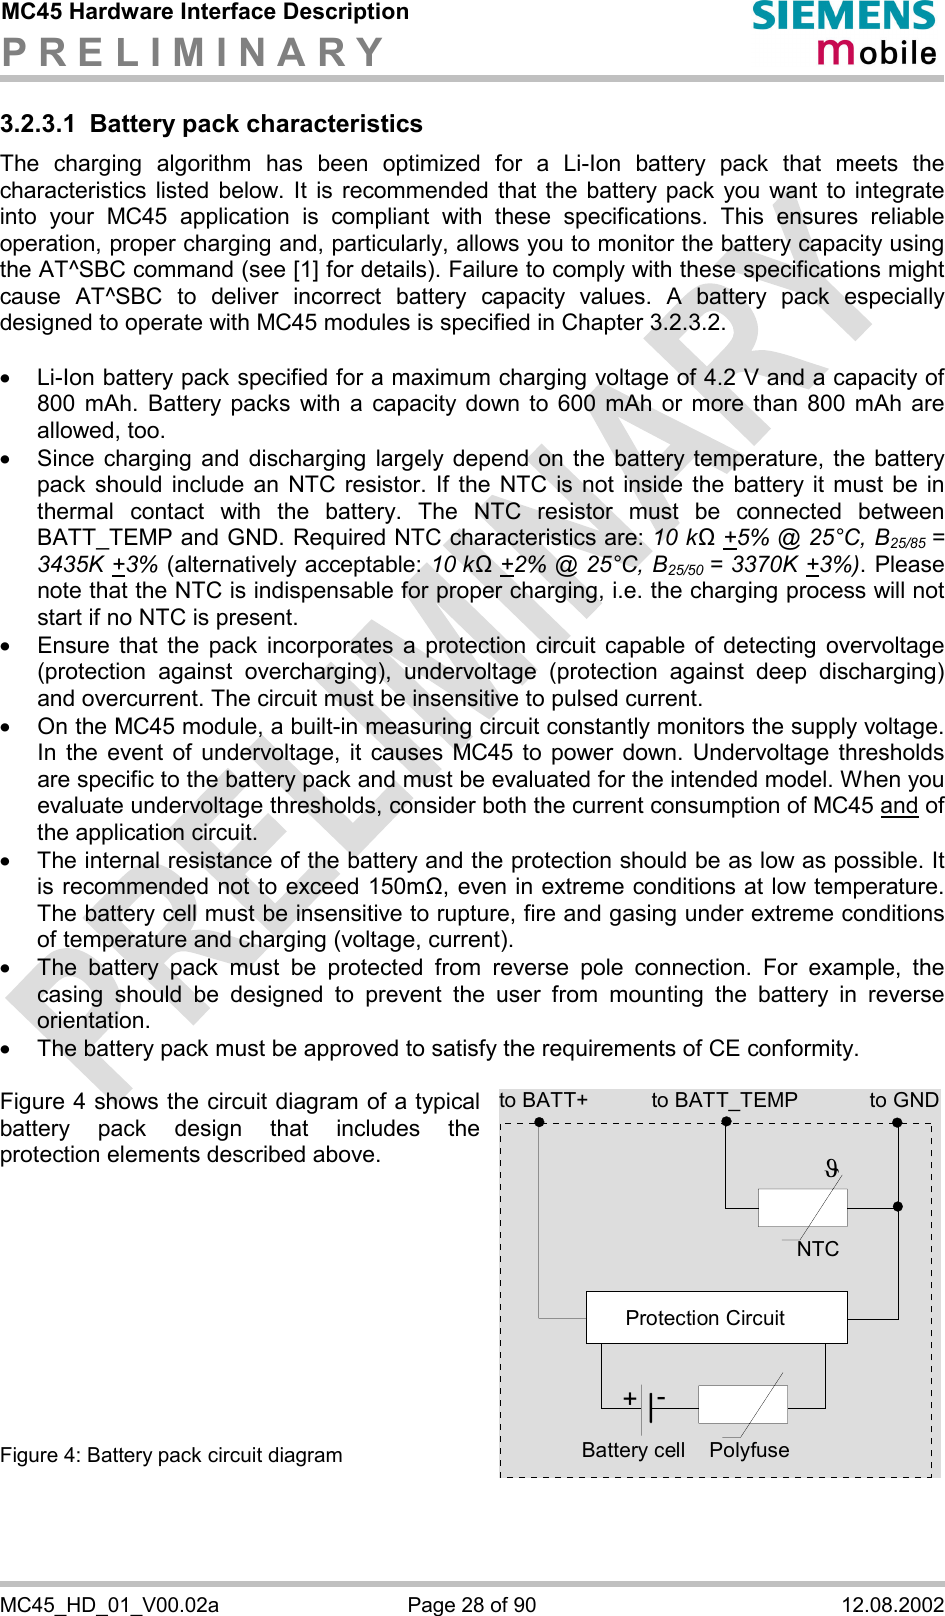 MC45 Hardware Interface Description P R E L I M I N A R Y      MC45_HD_01_V00.02a  Page 28 of 90  12.08.2002 3.2.3.1  Battery pack characteristics The charging algorithm has been optimized for a Li-Ion battery pack that meets the characteristics listed below. It is recommended that the battery pack you want to integrate into your MC45 application is compliant with these specifications. This ensures reliable operation, proper charging and, particularly, allows you to monitor the battery capacity using the AT^SBC command (see [1] for details). Failure to comply with these specifications might cause AT^SBC to deliver incorrect battery capacity values. A battery pack especially designed to operate with MC45 modules is specified in Chapter 3.2.3.2.  ·  Li-Ion battery pack specified for a maximum charging voltage of 4.2 V and a capacity of 800 mAh. Battery packs with a capacity down to 600 mAh or more than 800 mAh are allowed, too. ·  Since charging and discharging largely depend on the battery temperature, the battery pack should include an NTC resistor. If the NTC is not inside the battery it must be in thermal contact with the battery. The NTC resistor must be connected between BATT_TEMP and GND. Required NTC characteristics are: 10 kΩ +5% @ 25°C, B25/85 = 3435K +3% (alternatively acceptable: 10 kΩ +2% @ 25°C, B25/50  = 3370K +3%). Please note that the NTC is indispensable for proper charging, i.e. the charging process will not start if no NTC is present. ·  Ensure that the pack incorporates a protection circuit capable of detecting overvoltage (protection against overcharging), undervoltage (protection against deep discharging) and overcurrent. The circuit must be insensitive to pulsed current. ·  On the MC45 module, a built-in measuring circuit constantly monitors the supply voltage. In the event of undervoltage, it causes MC45 to power down. Undervoltage thresholds are specific to the battery pack and must be evaluated for the intended model. When you evaluate undervoltage thresholds, consider both the current consumption of MC45 and of the application circuit.  ·  The internal resistance of the battery and the protection should be as low as possible. It is recommended not to exceed 150m&quot;, even in extreme conditions at low temperature. The battery cell must be insensitive to rupture, fire and gasing under extreme conditions of temperature and charging (voltage, current). ·  The battery pack must be protected from reverse pole connection. For example, the casing should be designed to prevent the user from mounting the battery in reverse orientation. ·  The battery pack must be approved to satisfy the requirements of CE conformity.  Figure 4 shows the circuit diagram of a typical battery pack design that includes the protection elements described above.           Figure 4: Battery pack circuit diagram to BATT_TEMP to GNDNTCPolyfuseJProtection Circuit+-Battery cellto BATT+